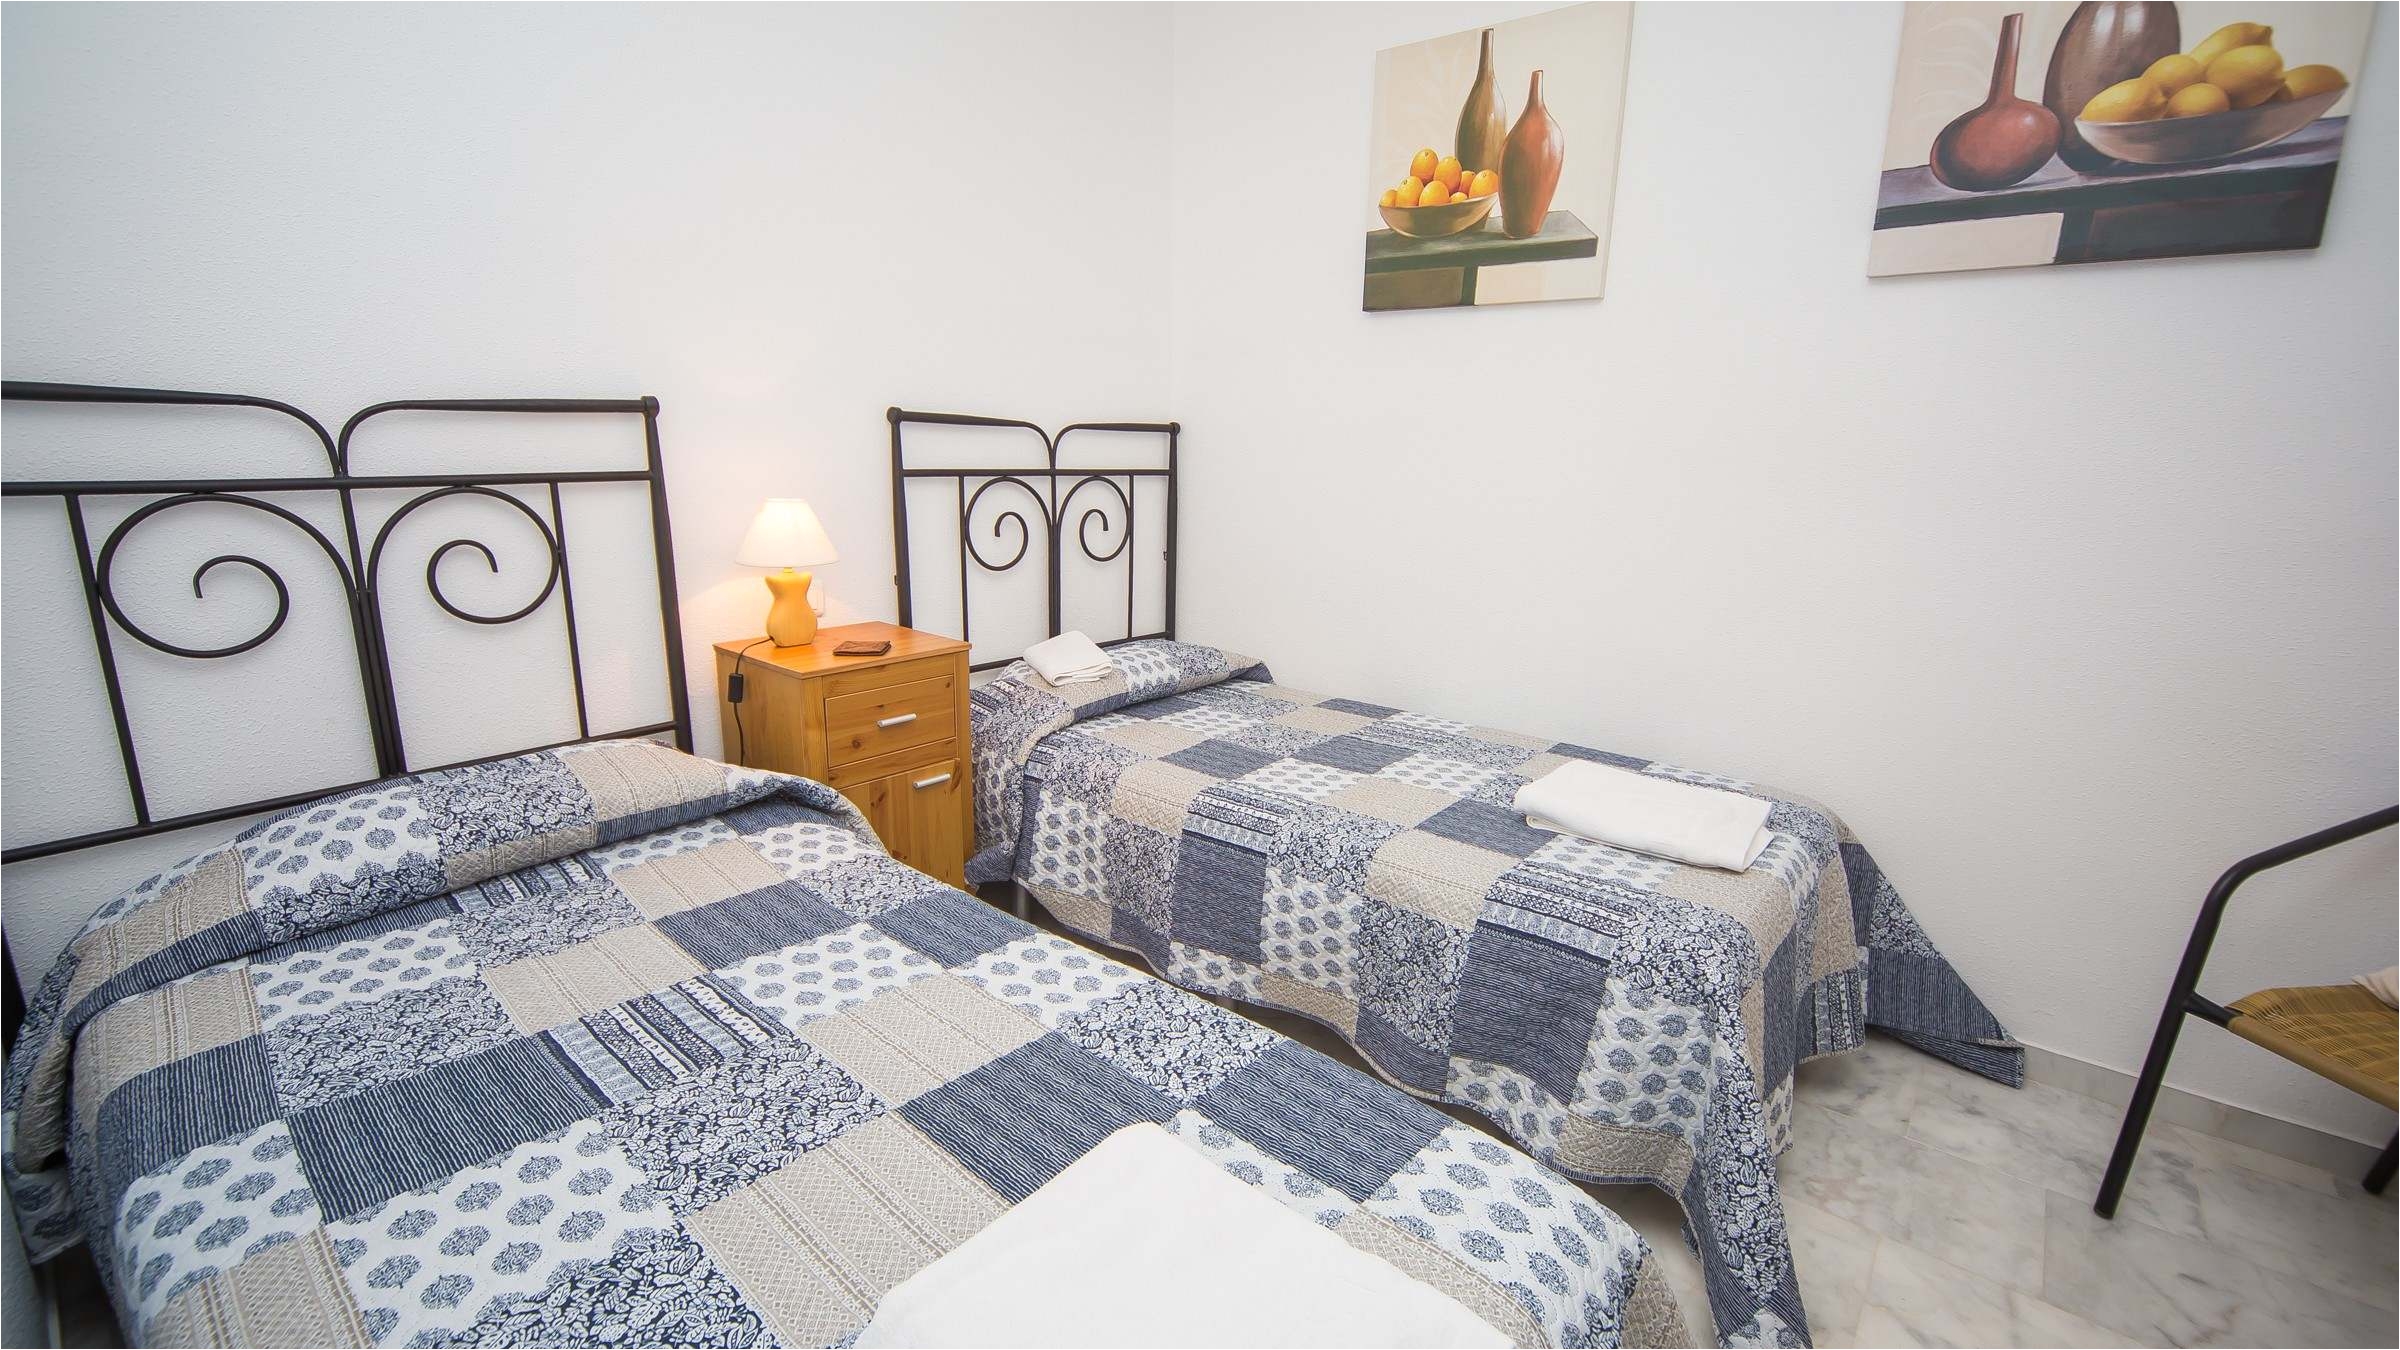 29 2 bedrooms apartments for rent lovely apartments in casares hc pensamiento 0d